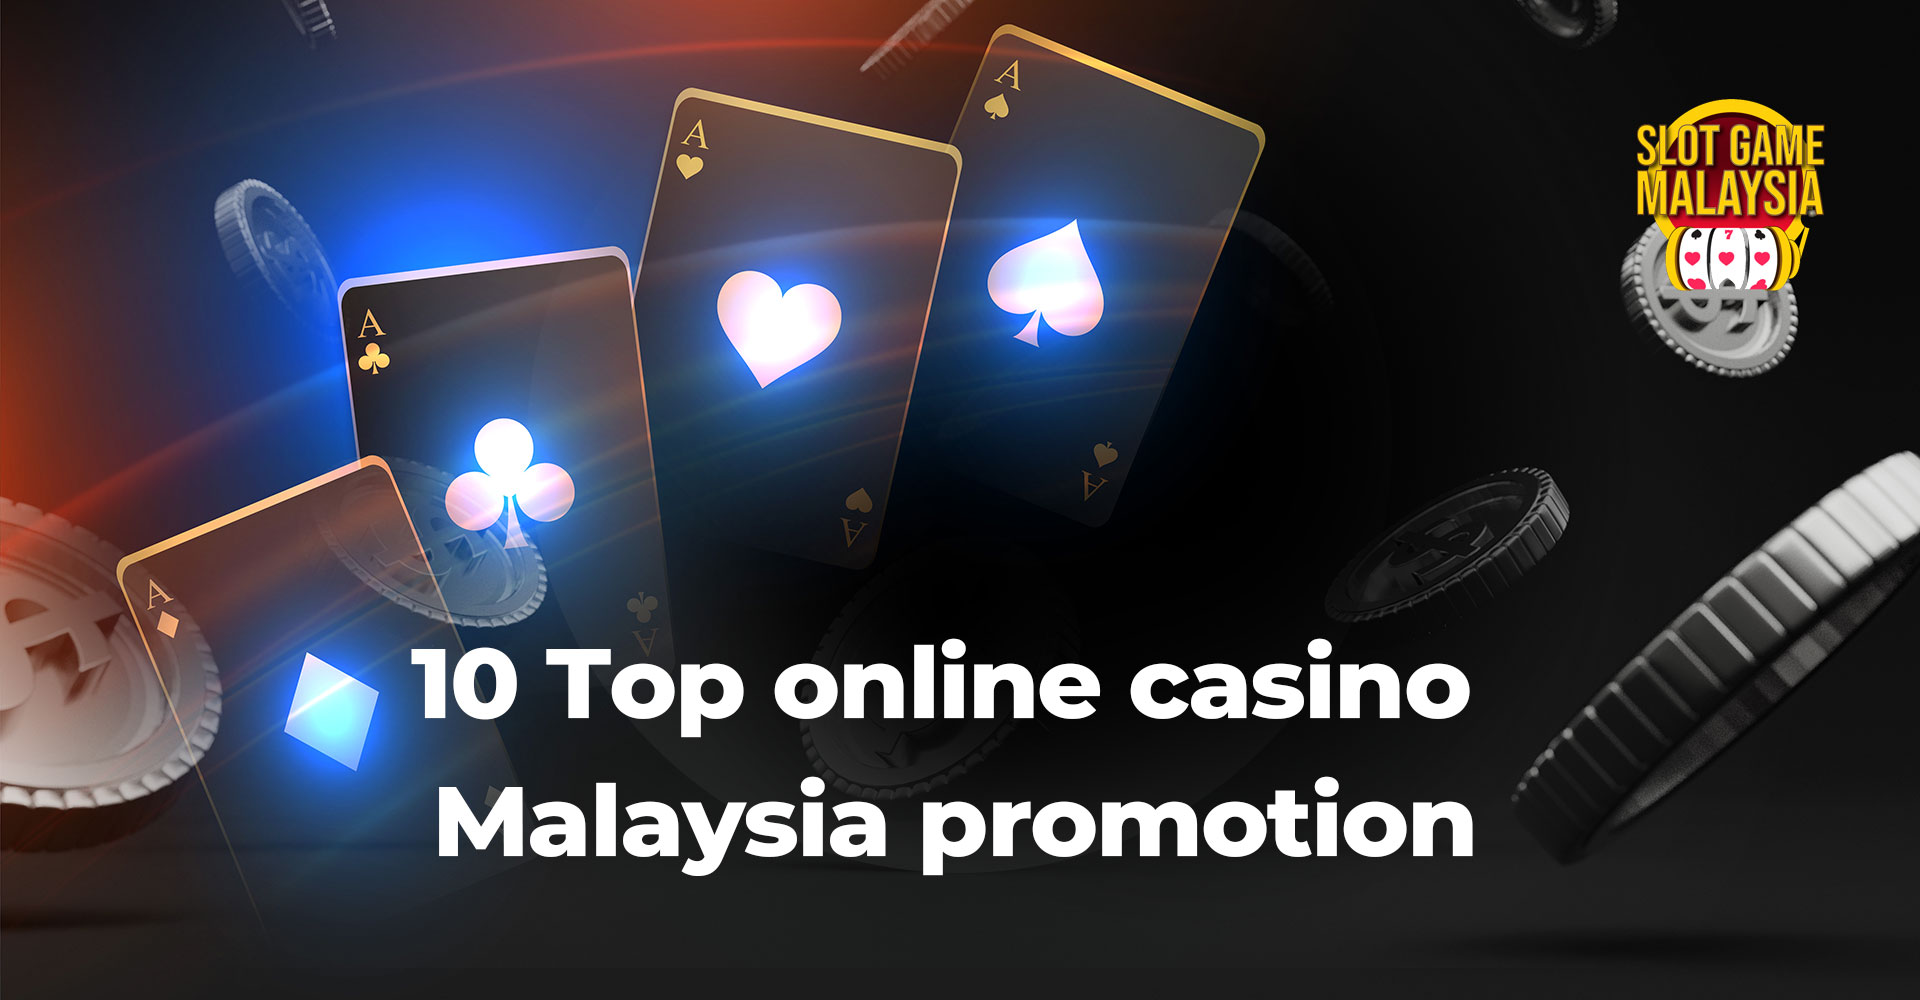 10 Top online casino malaysia promotion